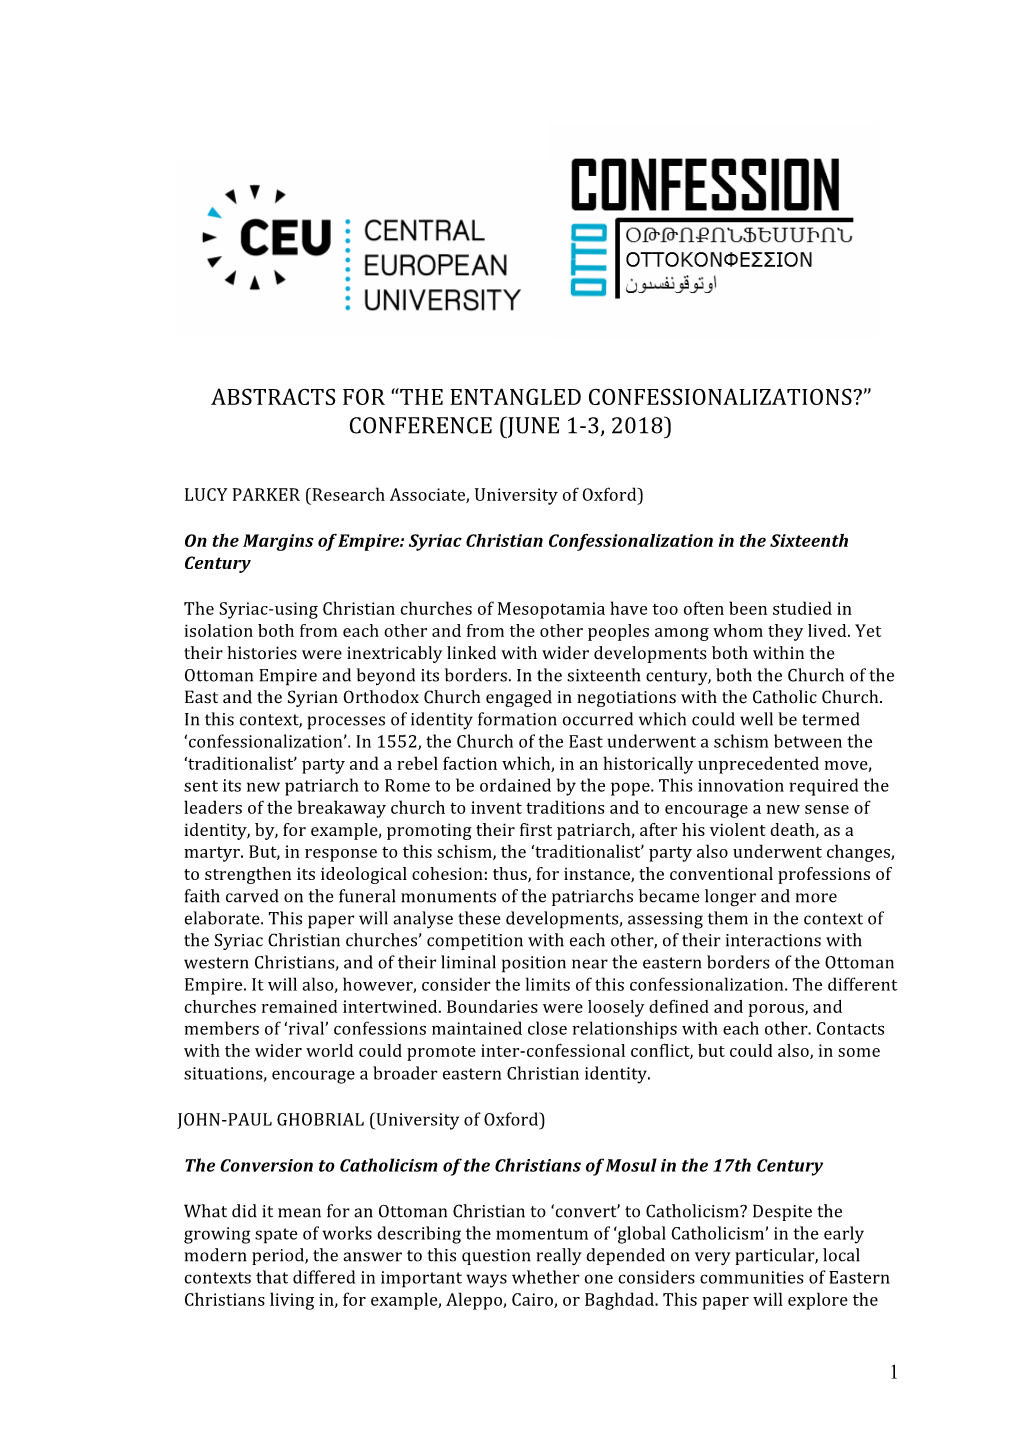 Abstracts for “The Entangled Confessionalizations?” Conference (June 1-3, 2018)